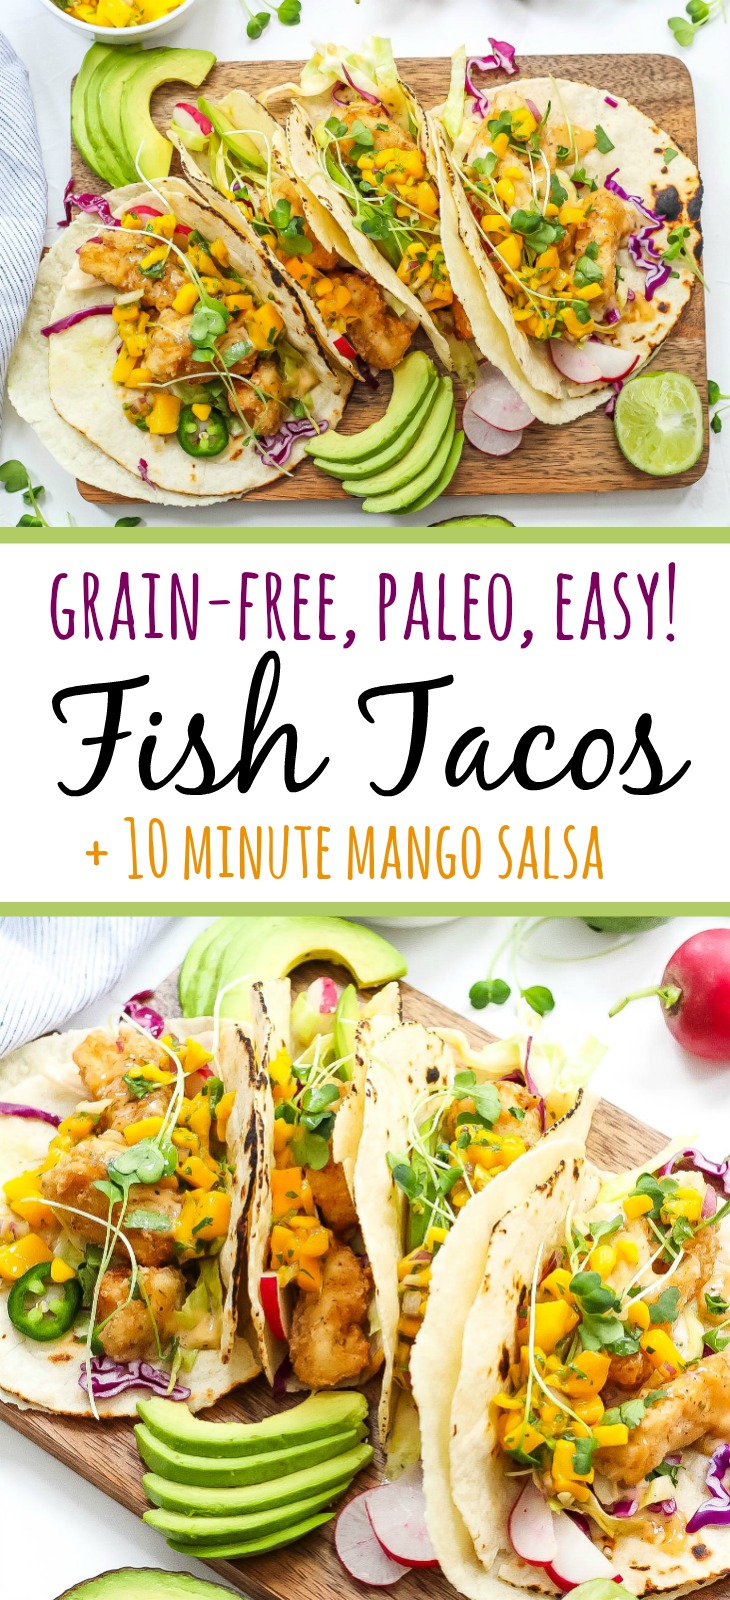 These grain free tacos is a fun and quick breaded fish recipe with easy mango salsa! Paleo fish tacos are totally gluten-free, family friendly, and even Whole30 if you skip the grain free tortilla and go for a lettuce wrap fish taco! Either way, these paleo fish tacos will be a summer favorite! #paleofishtacos #grainfreetacos #paleofish